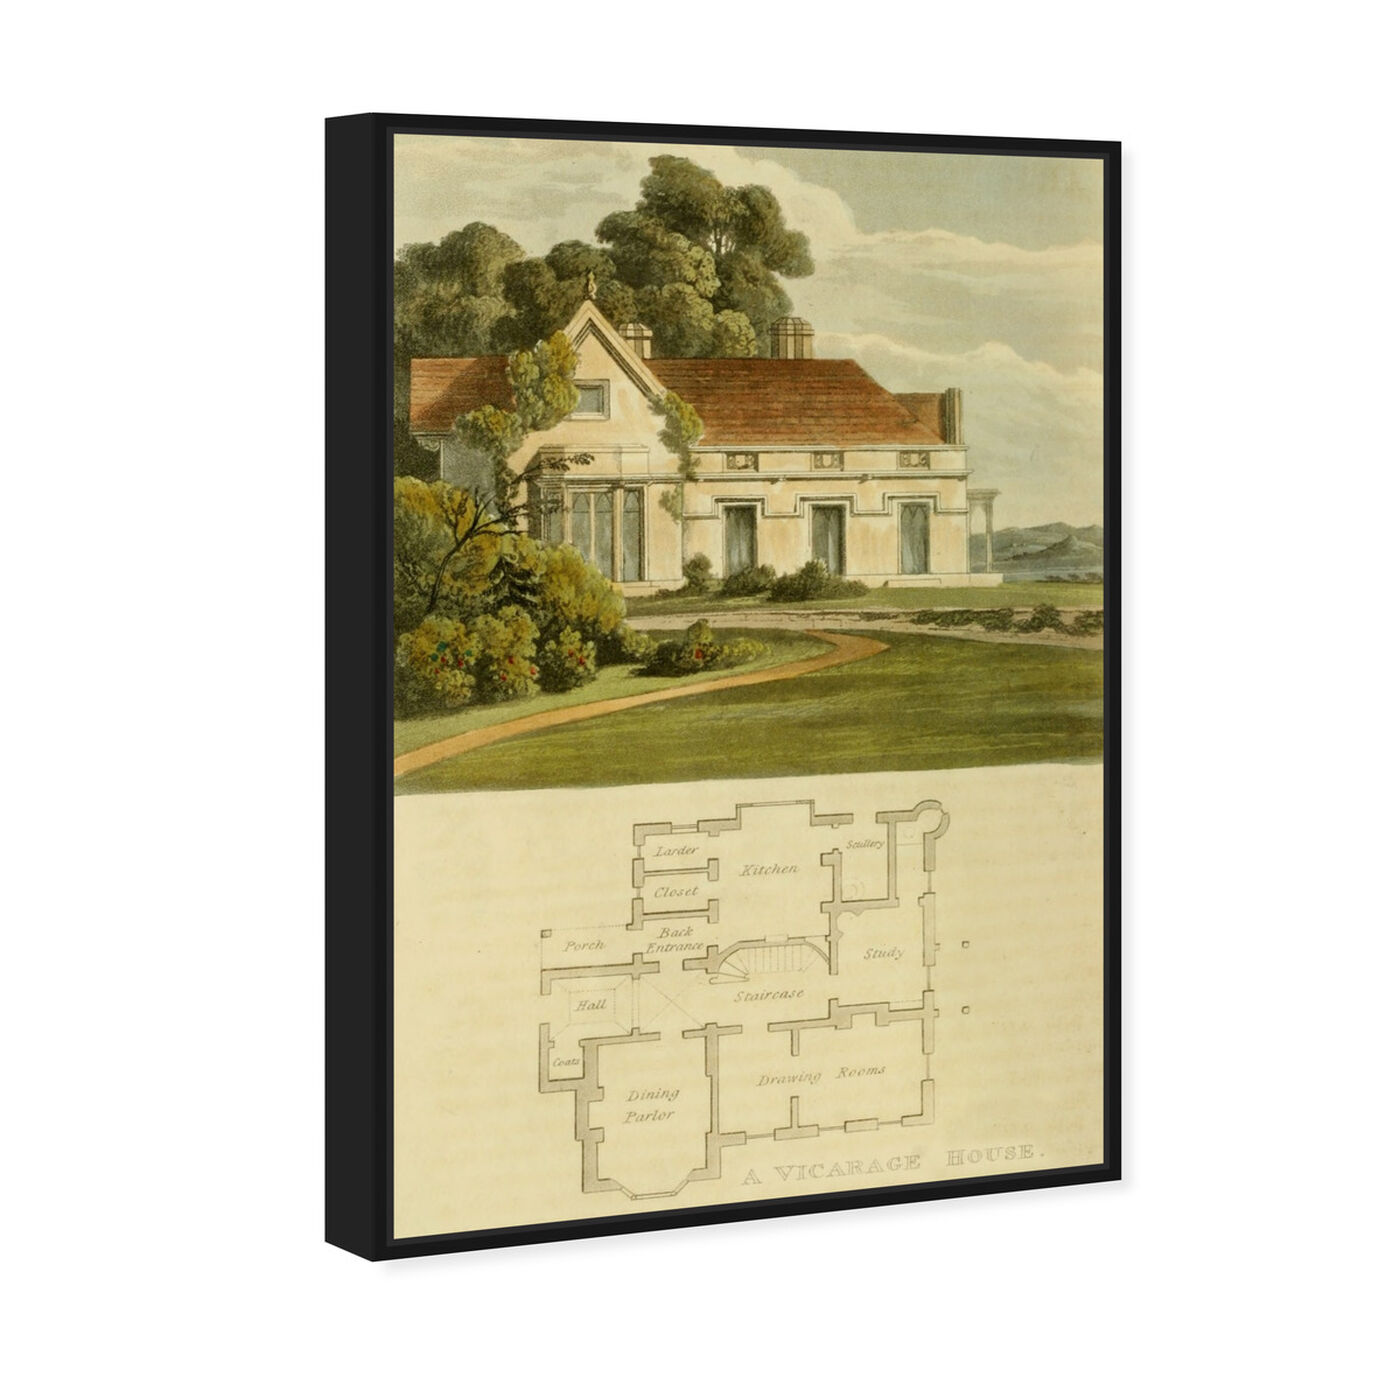 Angled view of Vicarage House - The Art Cabinet featuring architecture and buildings and structures art.